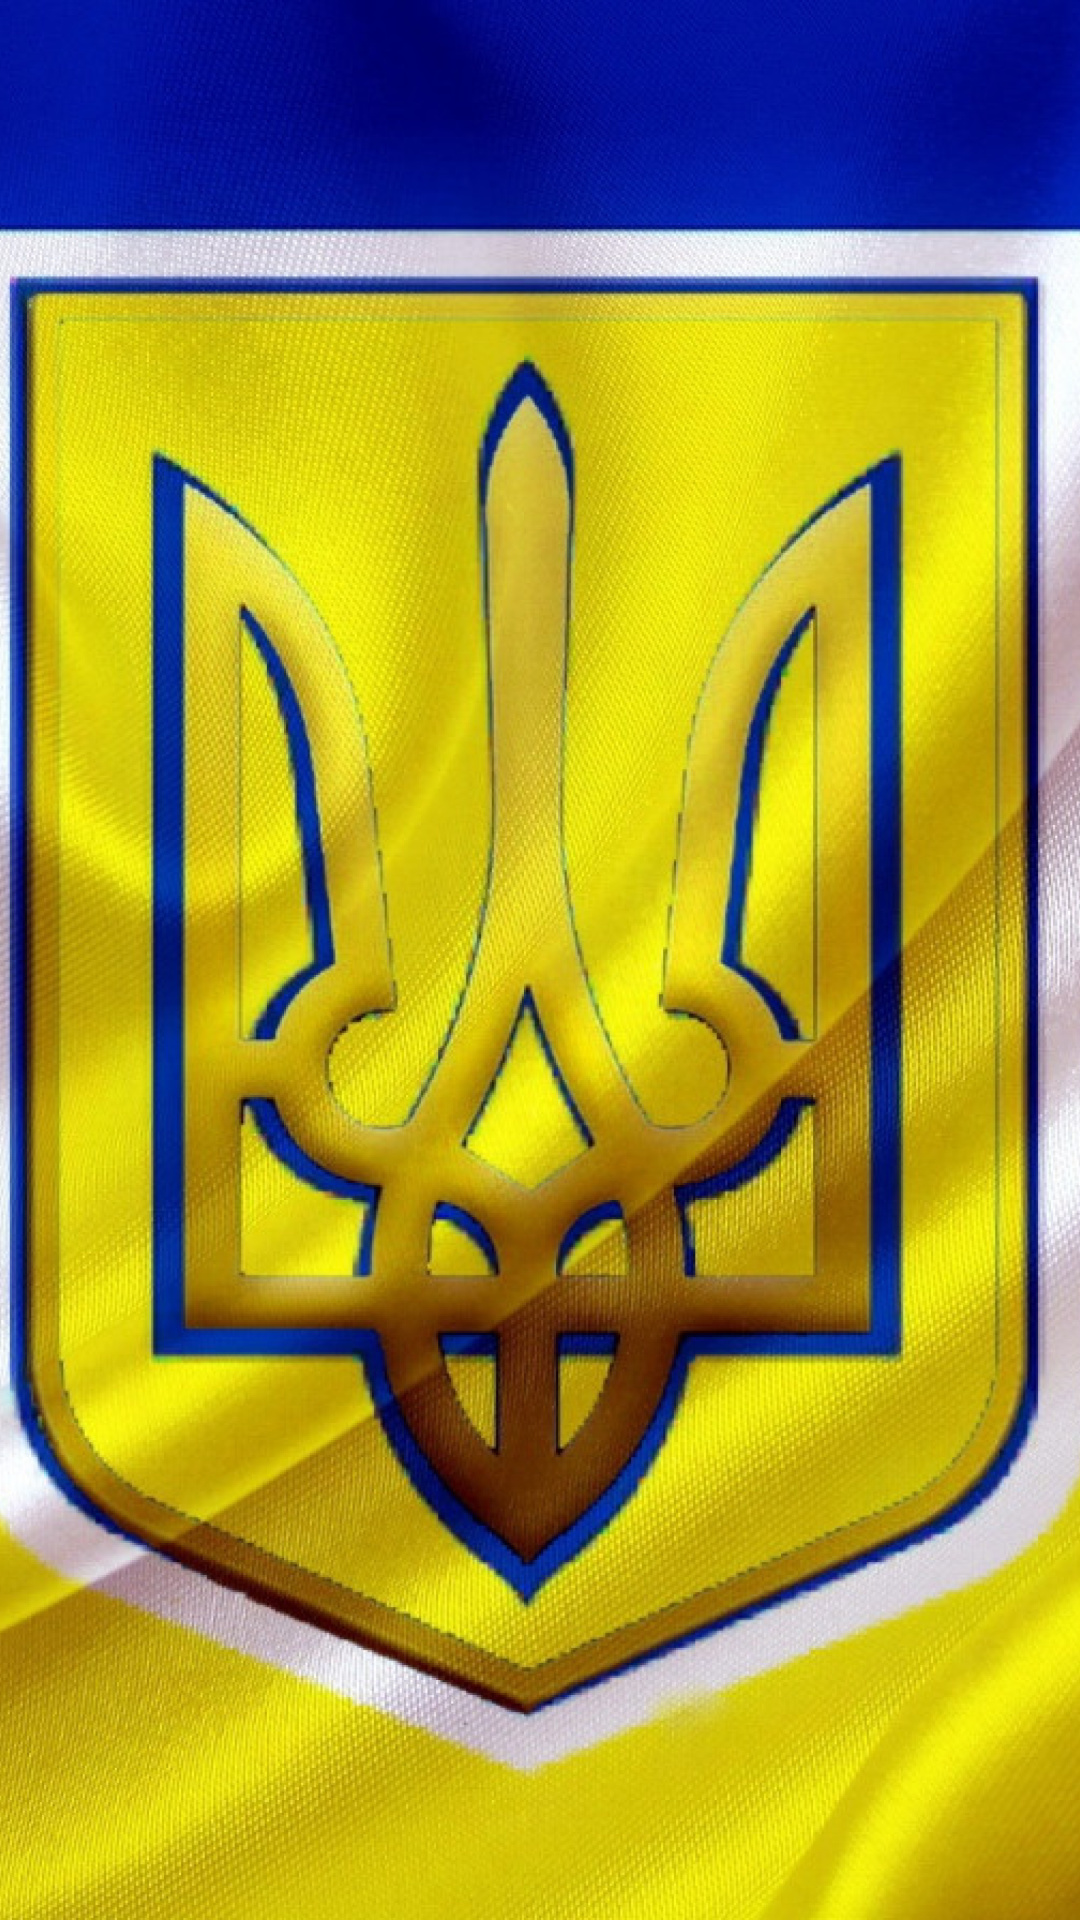 Flag and Coat of arms Of Ukraine screenshot #1 1080x1920